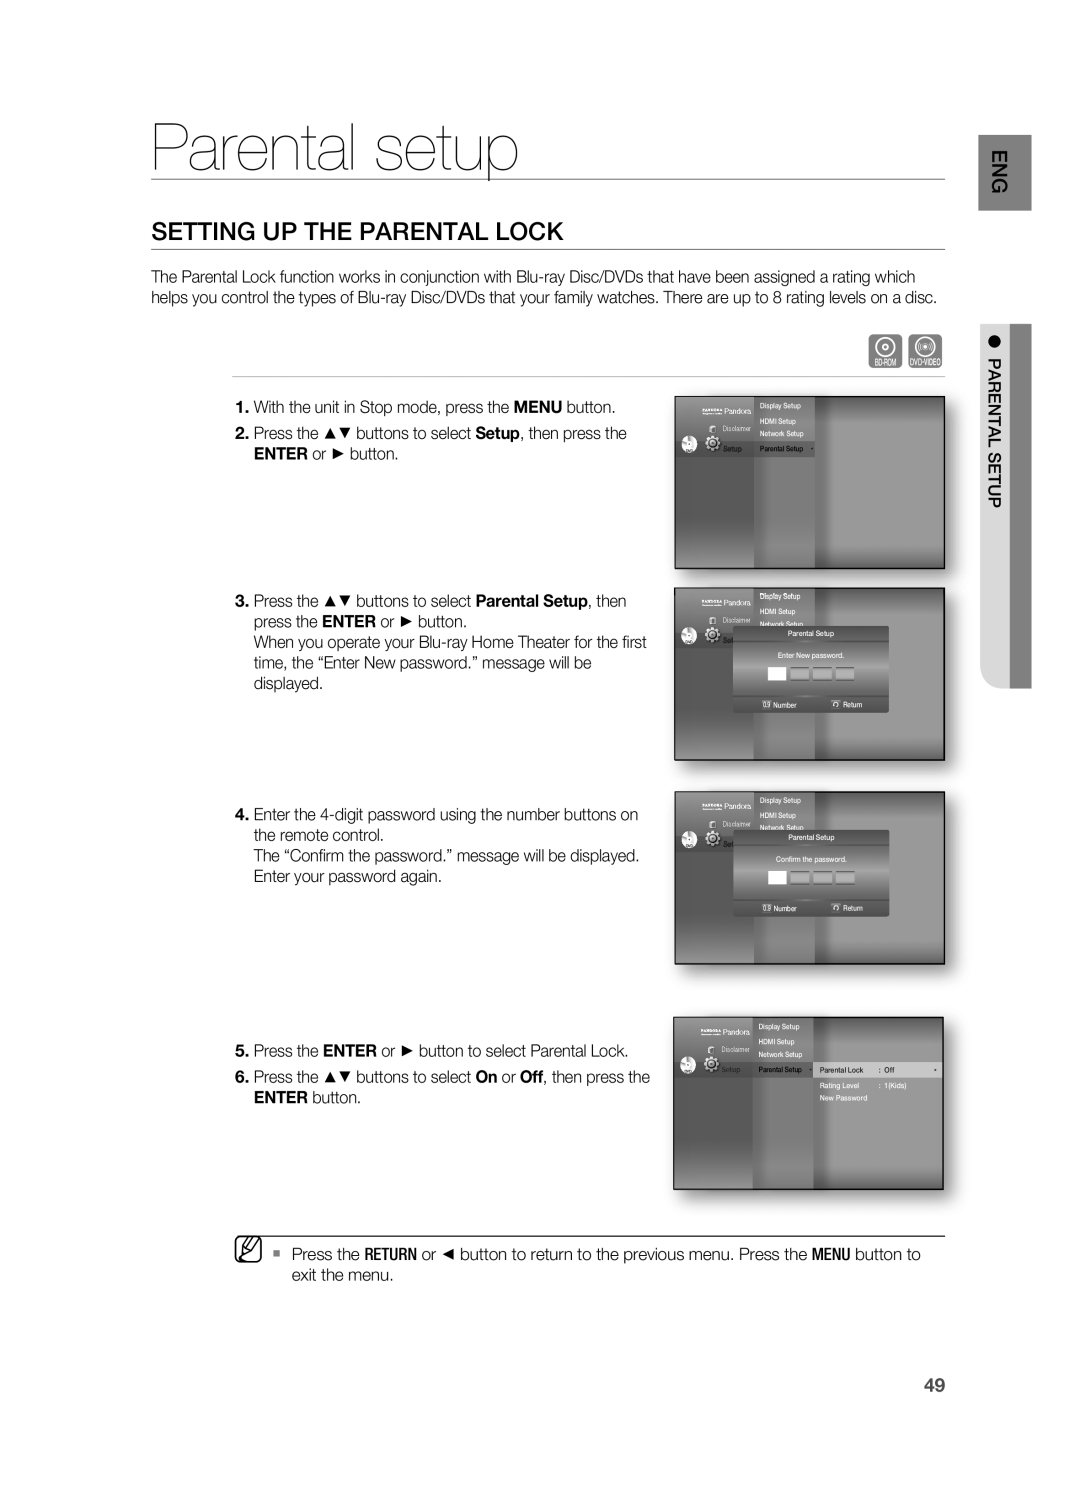 Samsung HT-BD1200 Parental setup, Setting Up The Parental Lock, With the unit in Stop mode, press the MENU button 